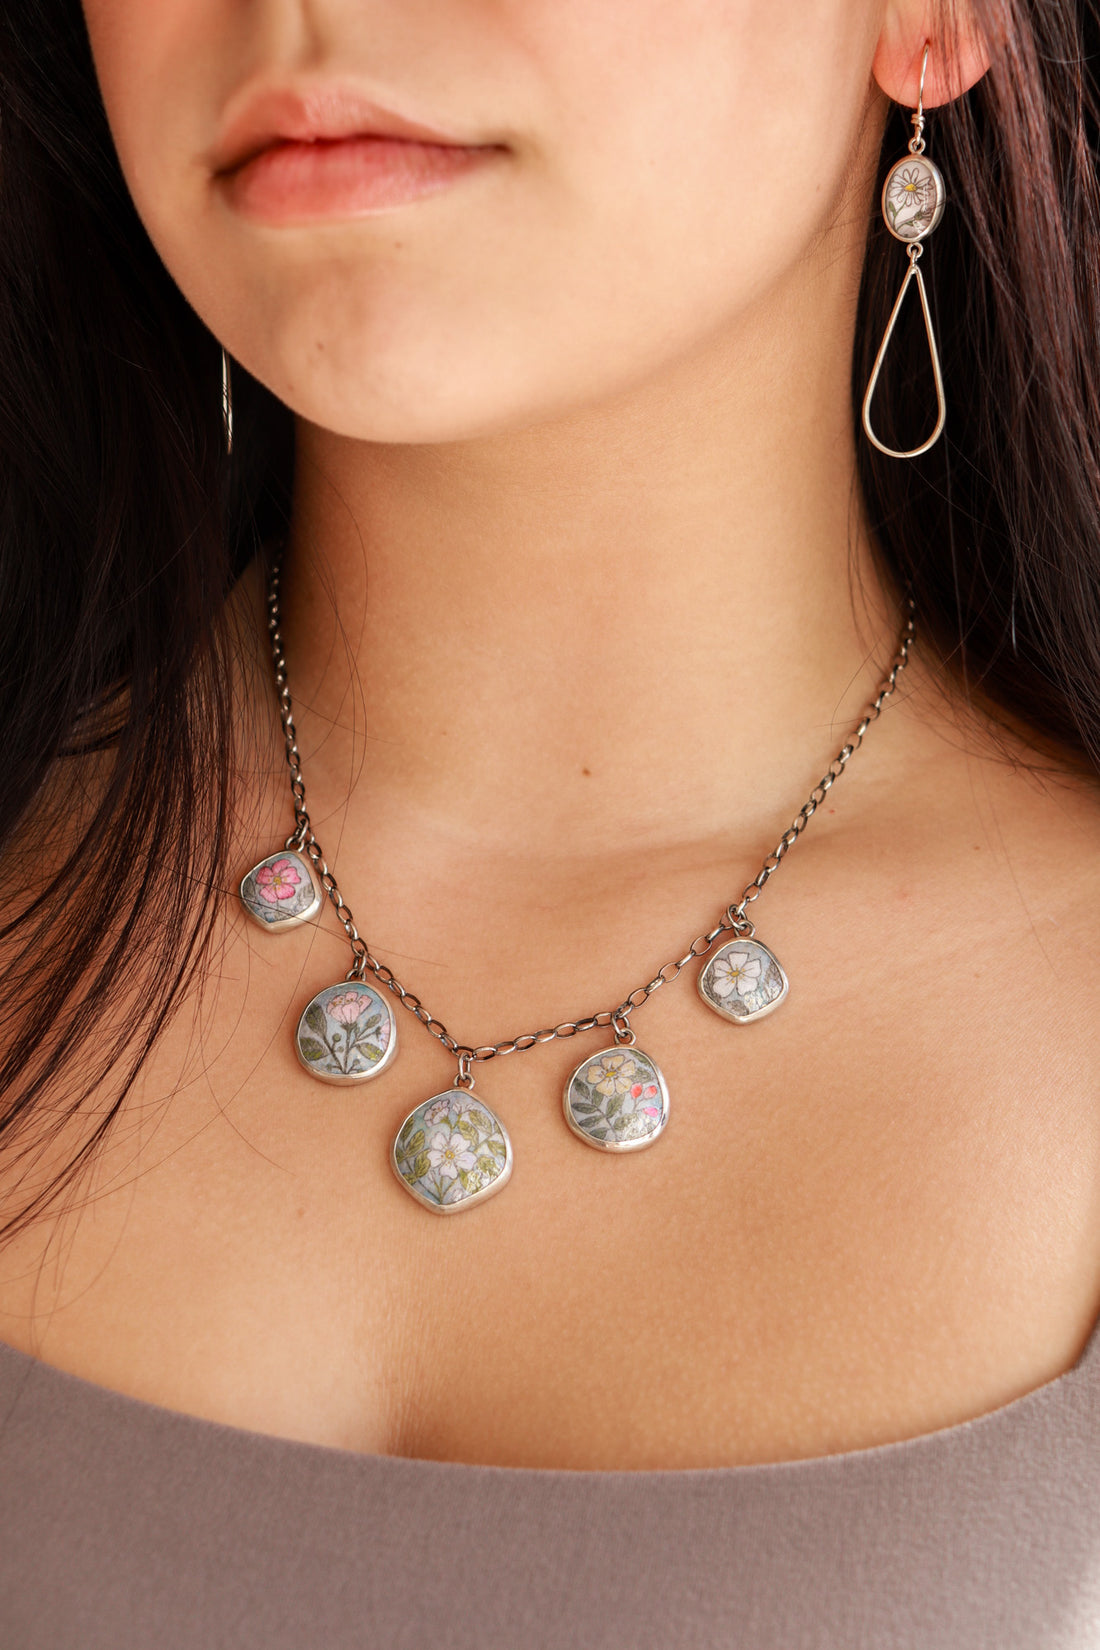 Blue Wild Roses Charm Necklace